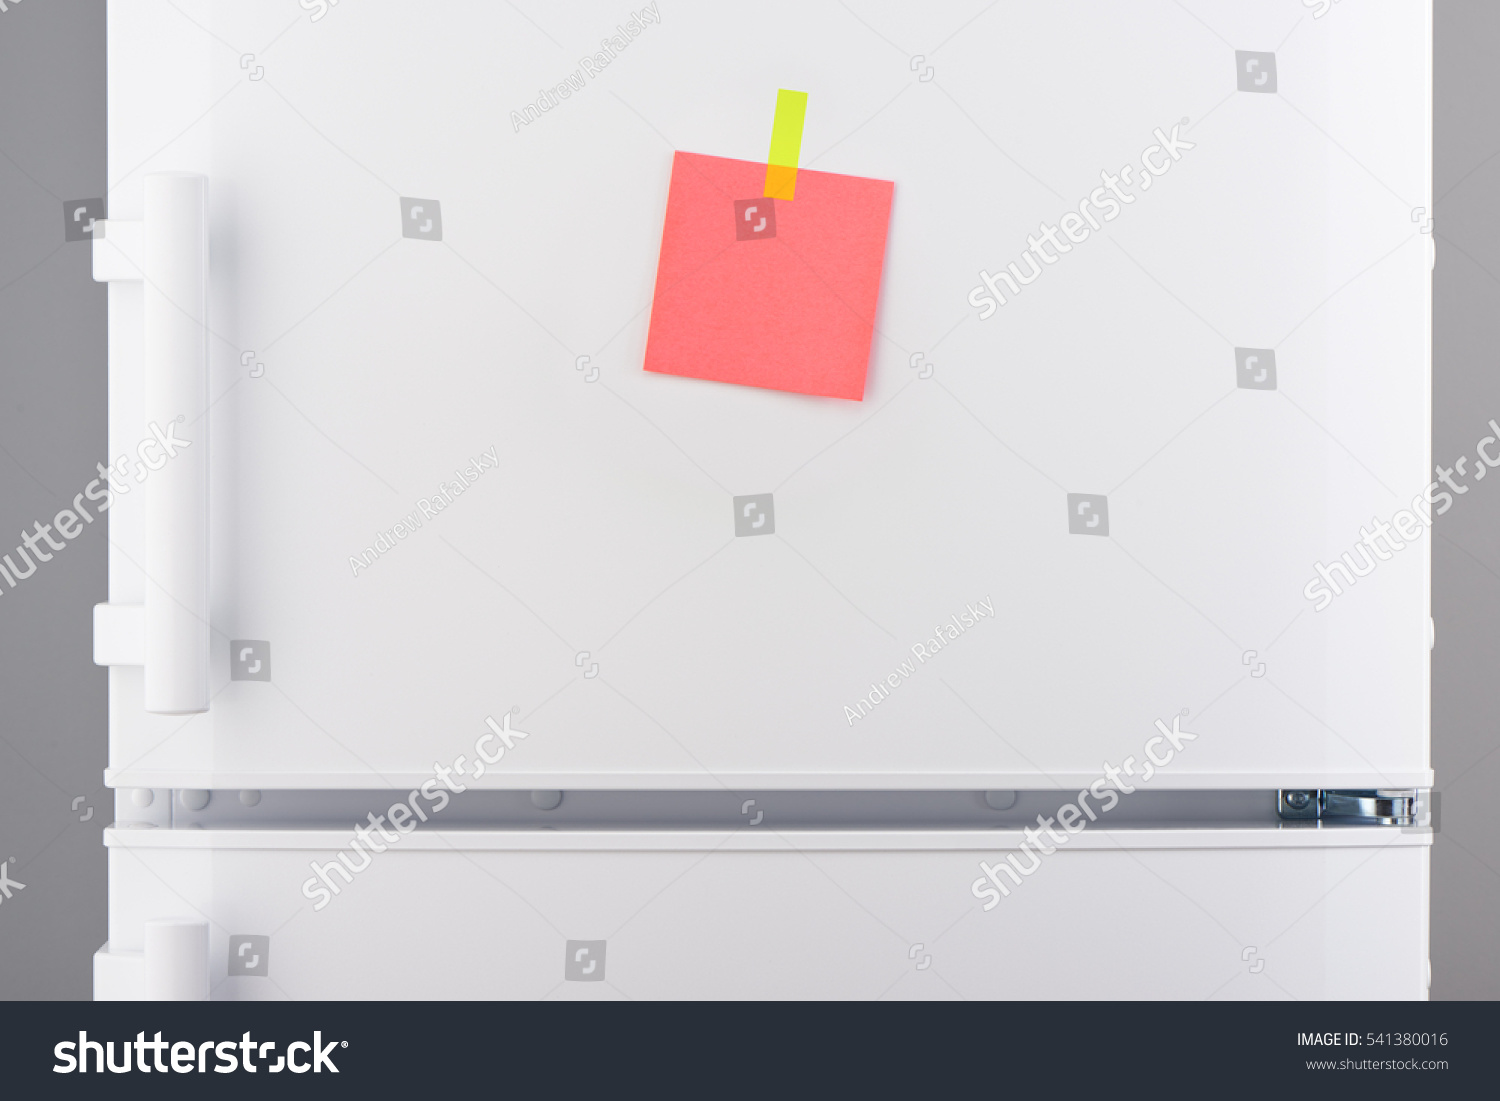 Blank pink paper note attached with yellow sticker on white refrigerator door #541380016